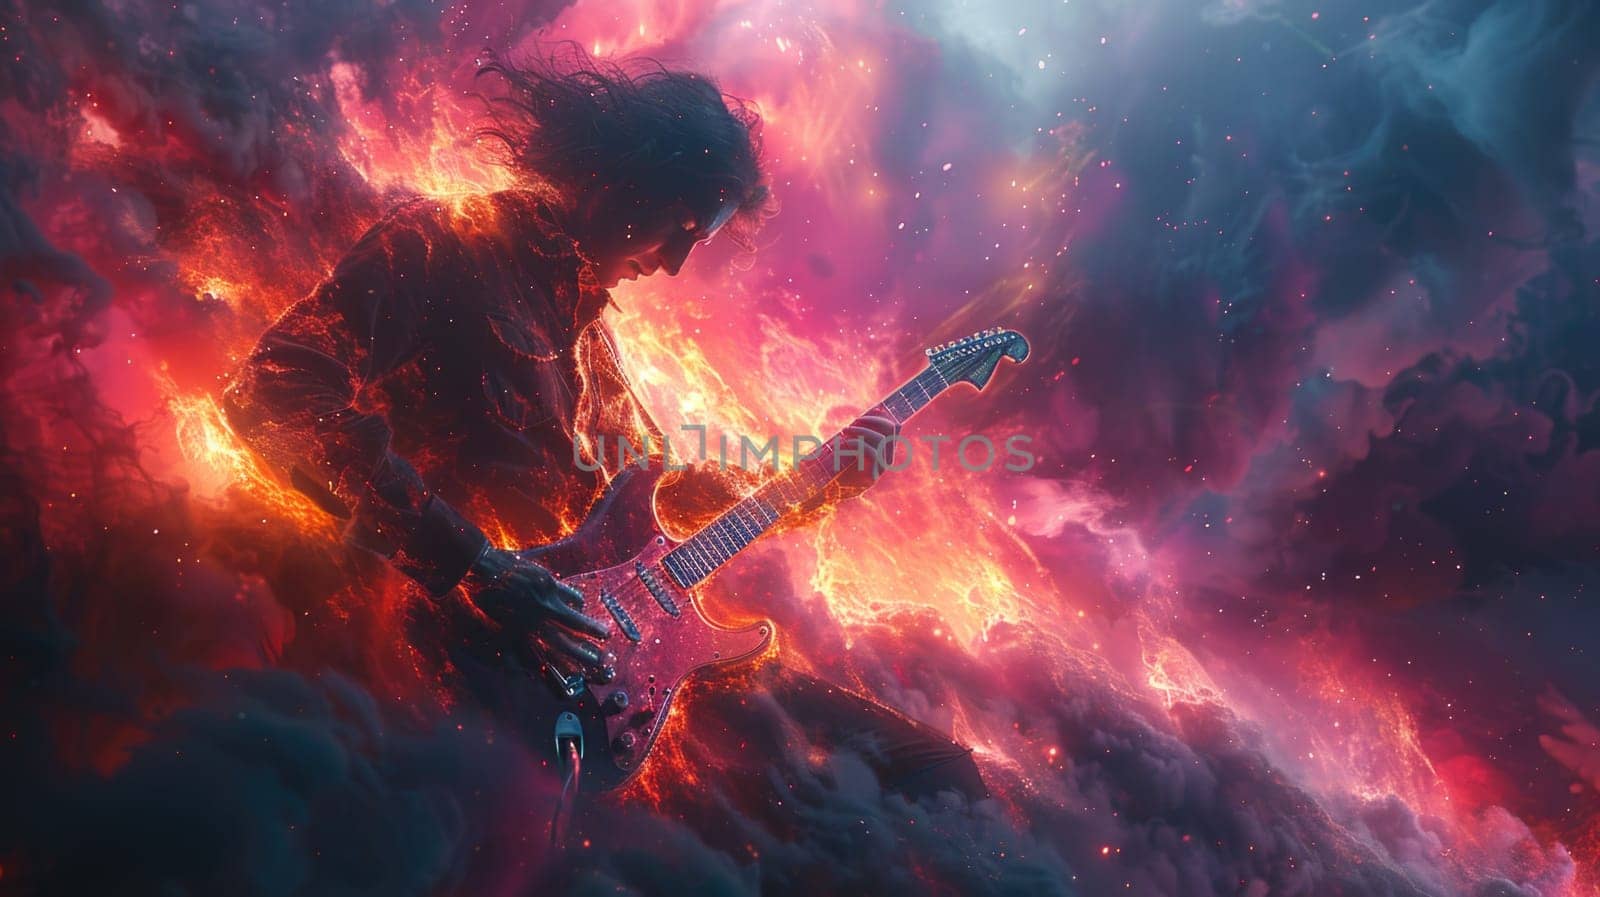 A man playing an electric guitar passionately in front of a vibrant and colorful background.